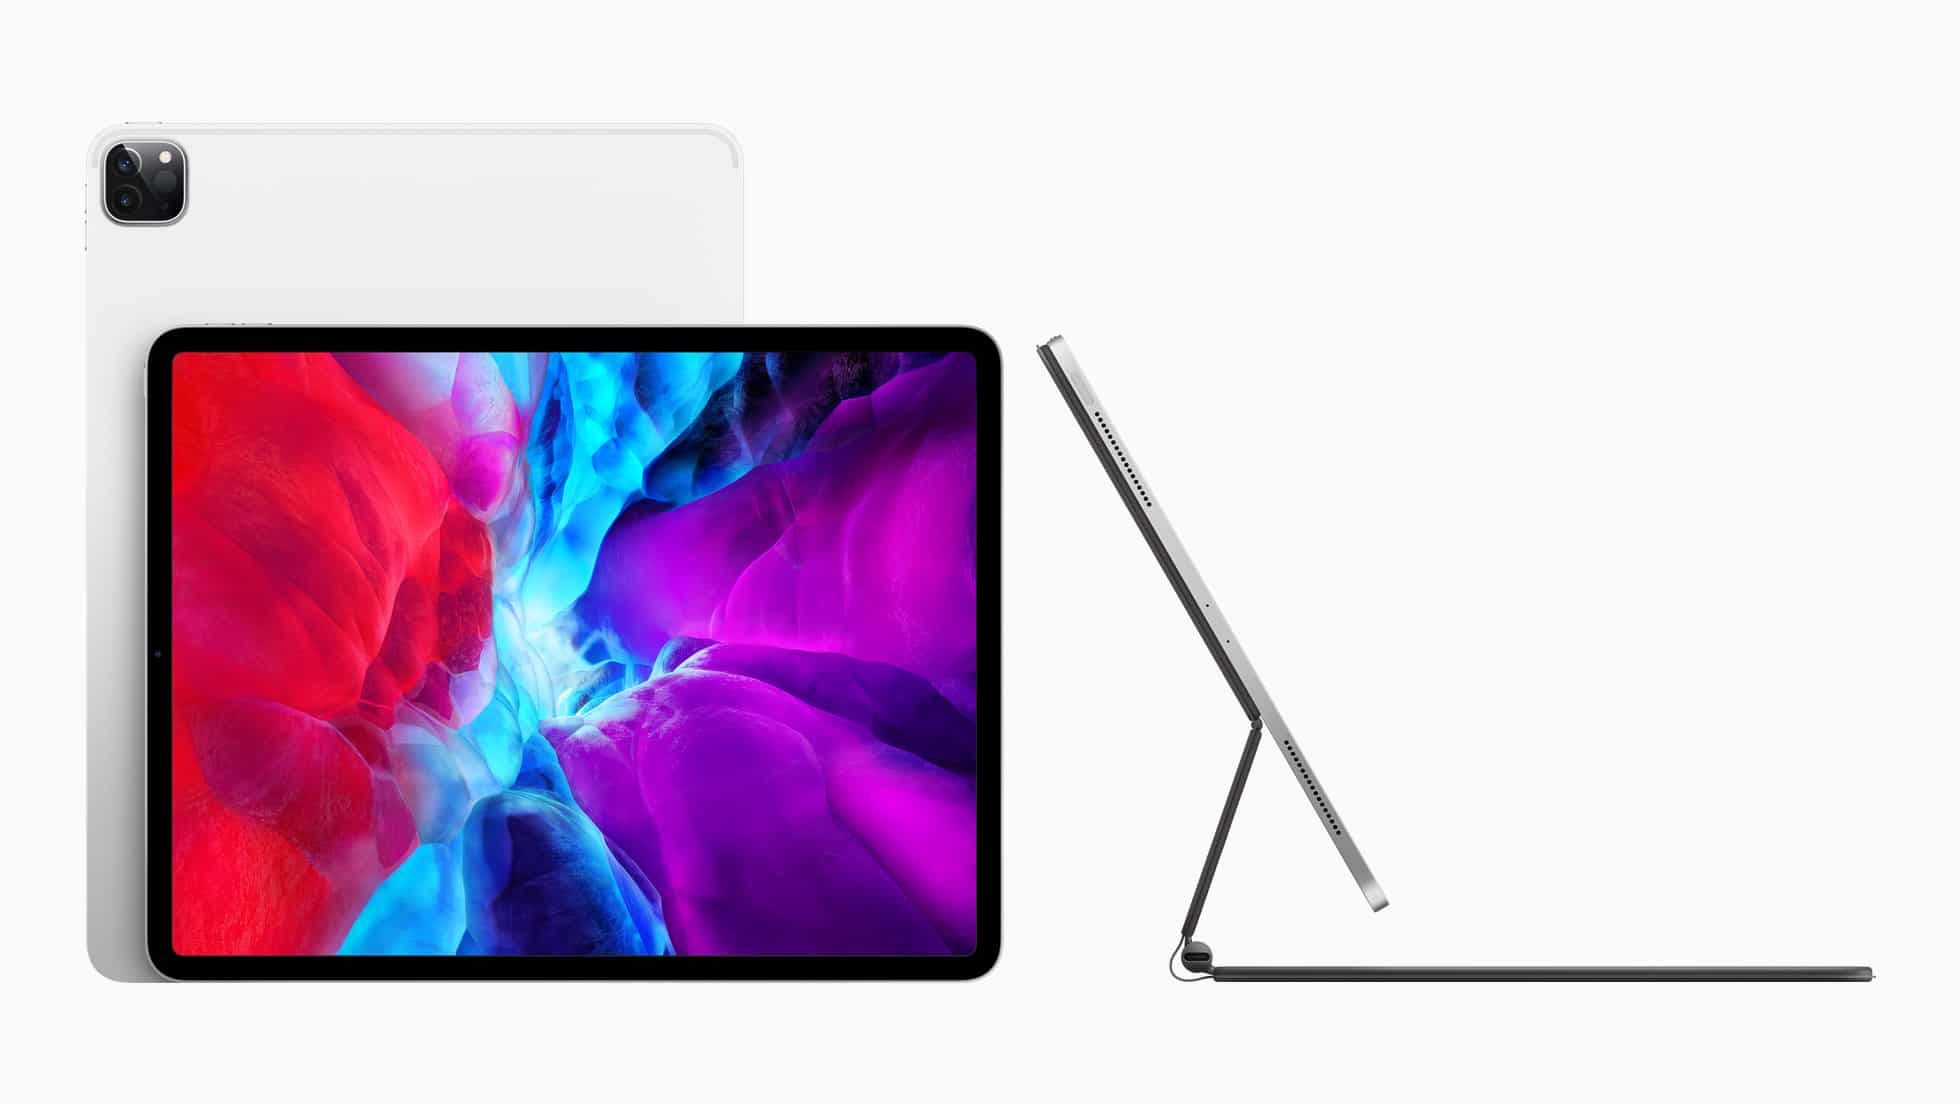 Apple launches new iPad Pro with LiDAR scanner and trackpad support on iPadOS